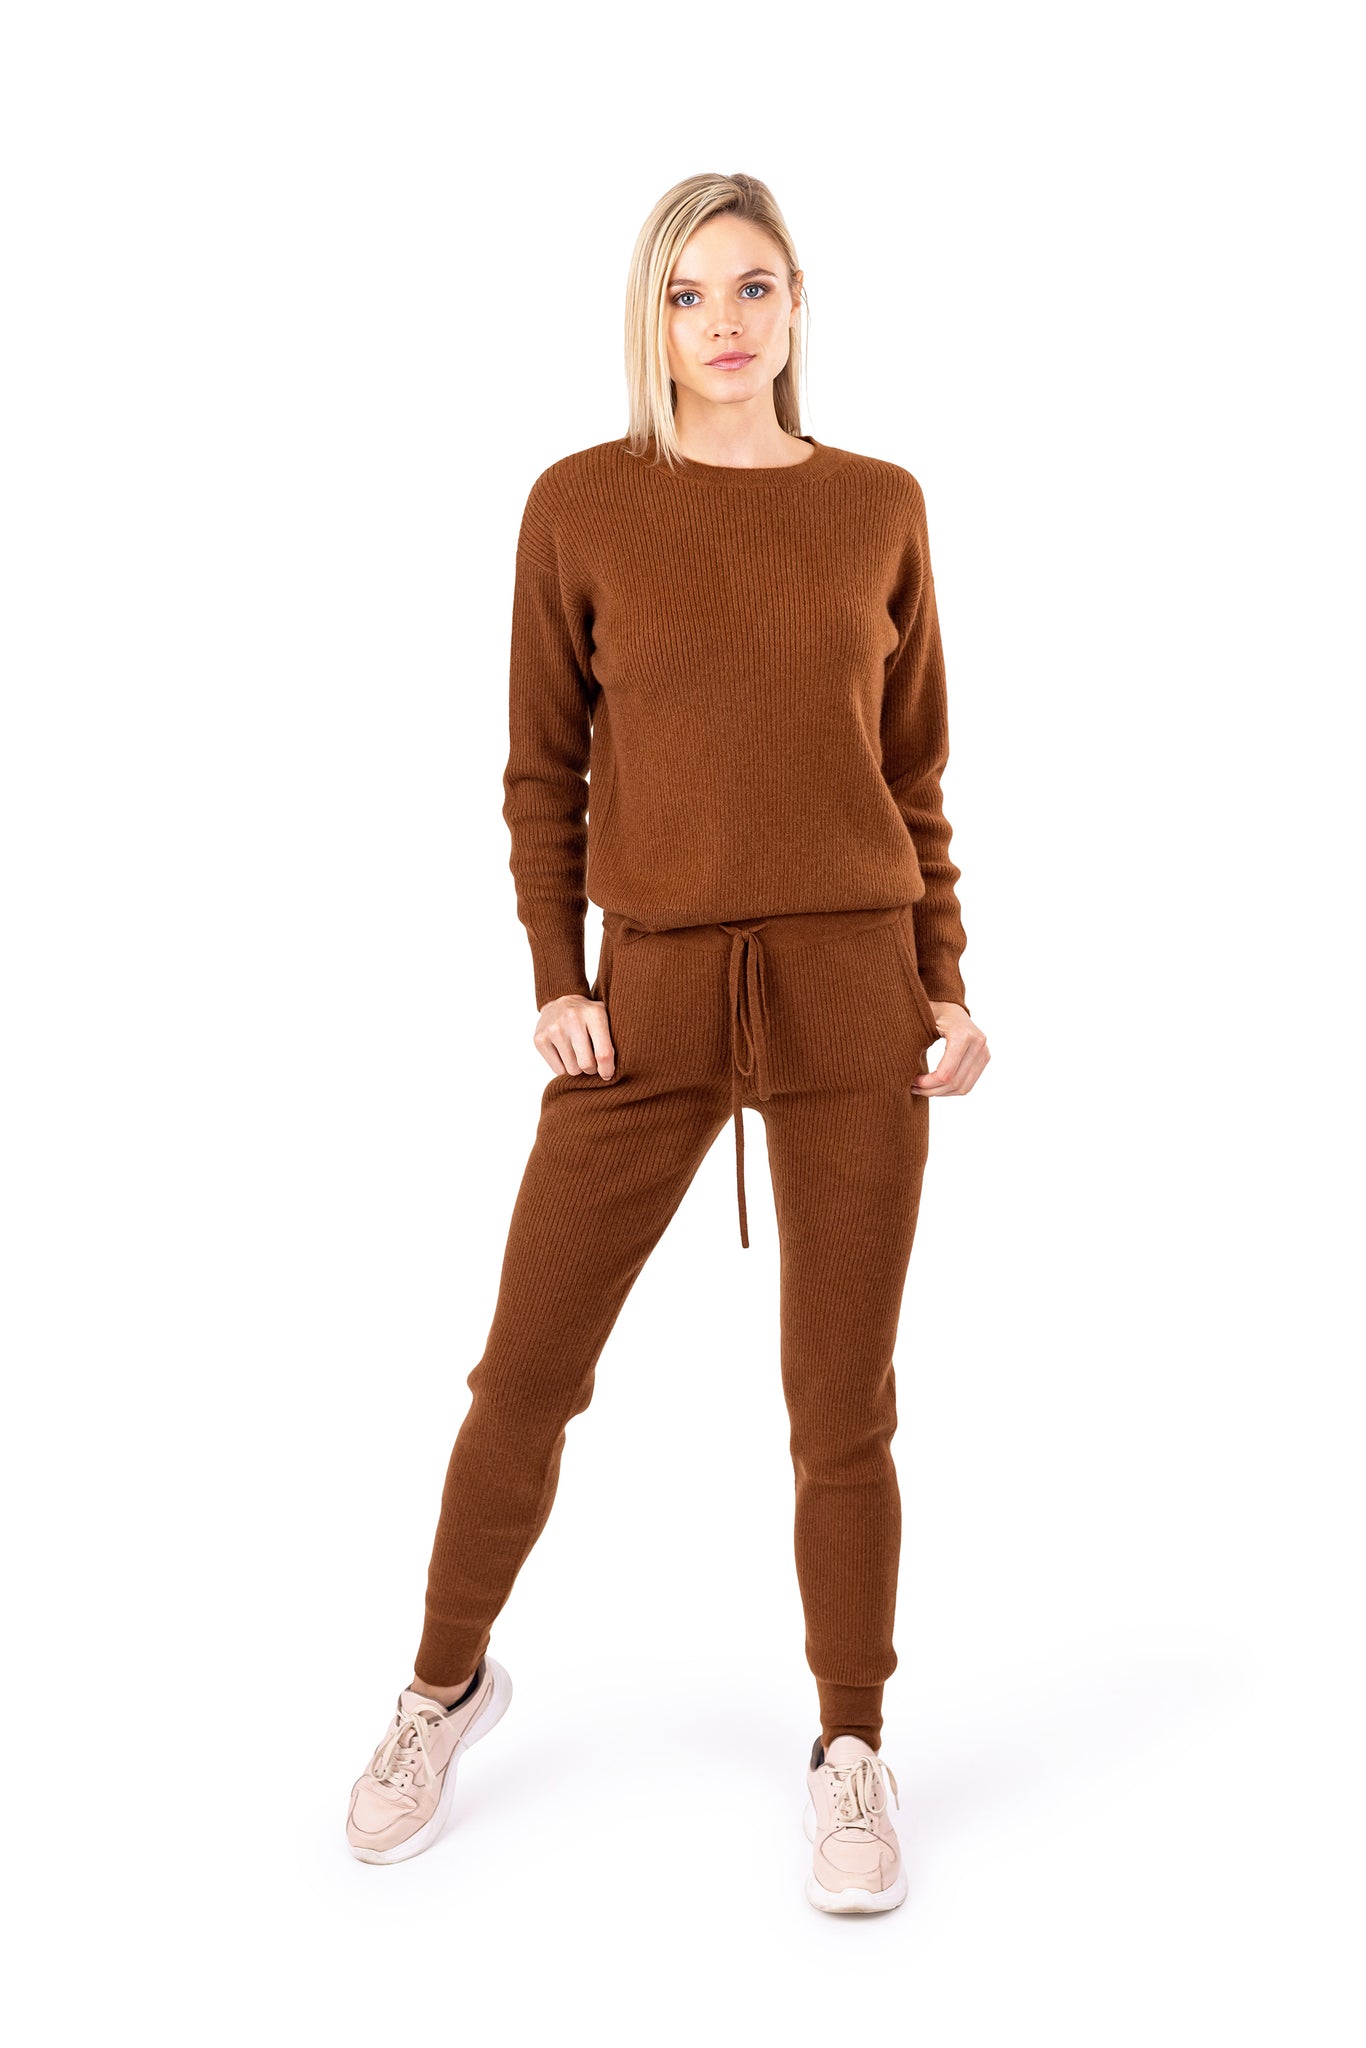 Loungewear Set – Indoor & Outdoor Comfy Loungewear | Made From 100% Cashmere